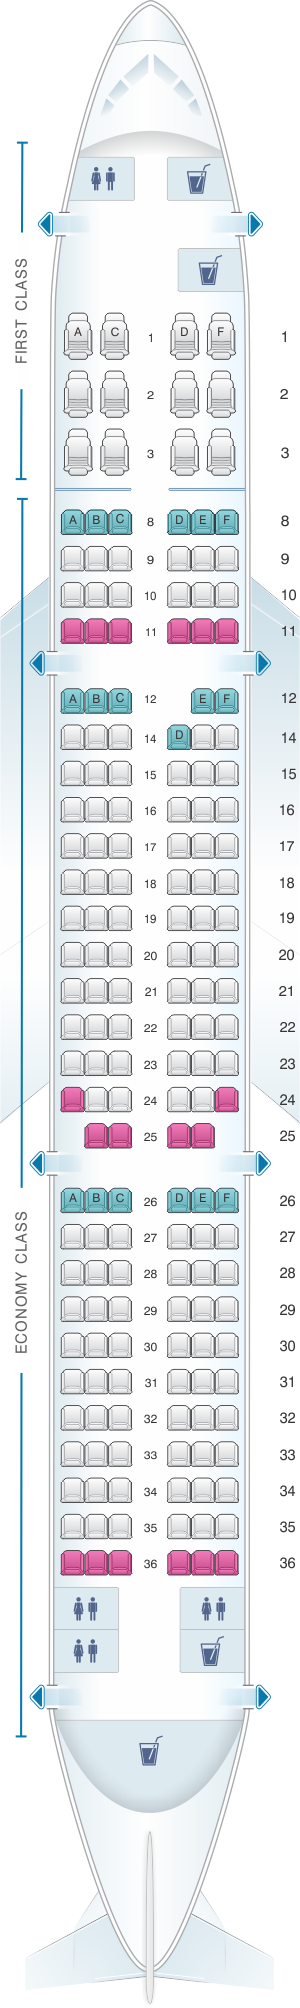 Seat Map Airbus A321 200 Qatar Airways Best Seats In The Plane Images